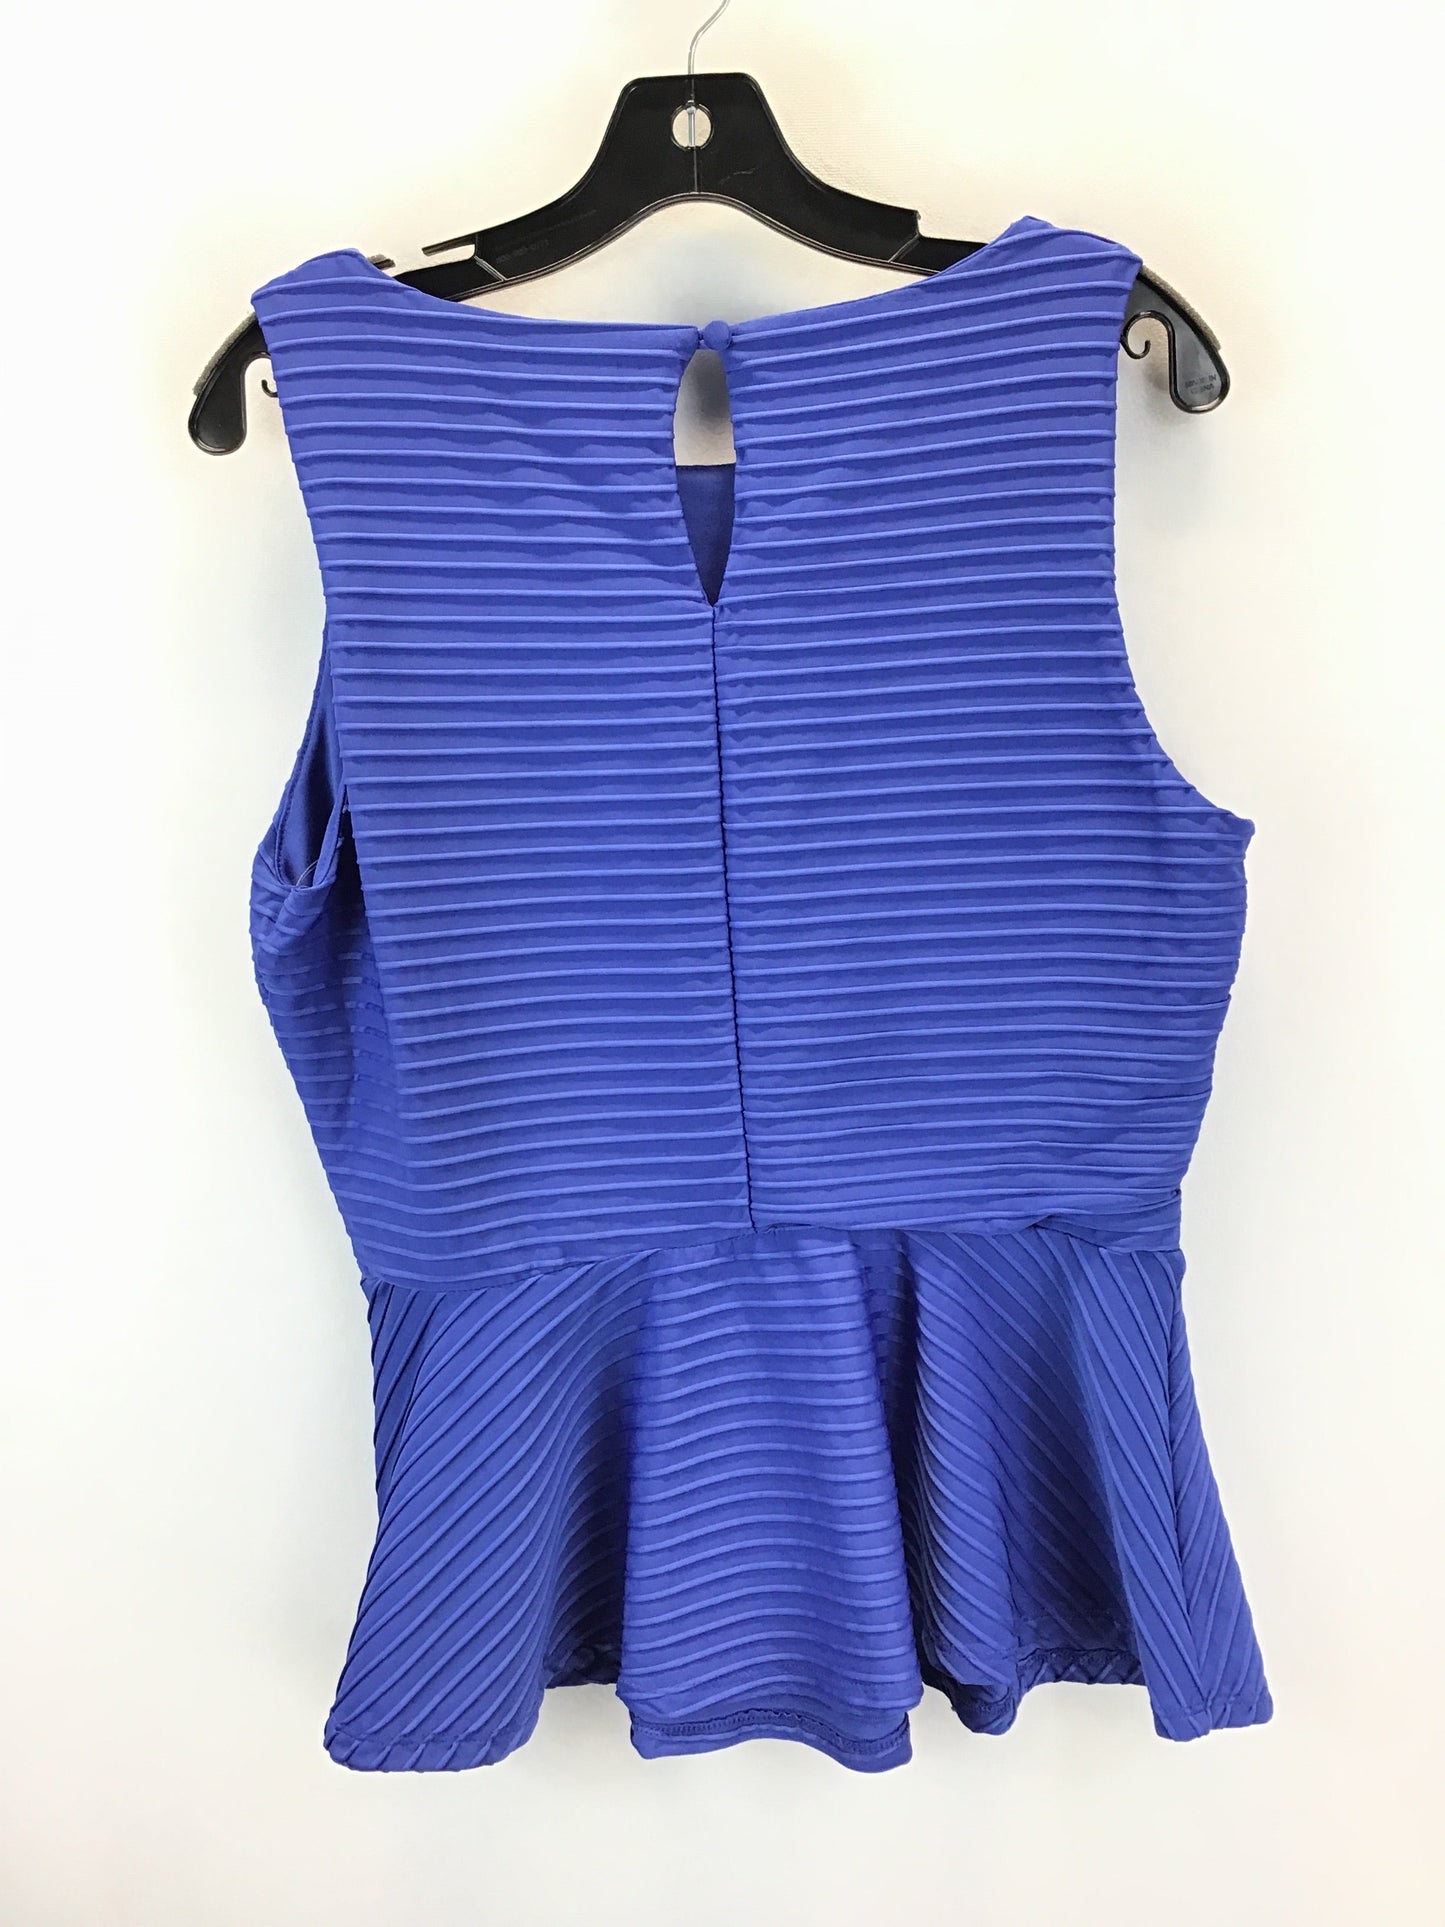 Top Sleeveless By Bisou Bisou  Size: L